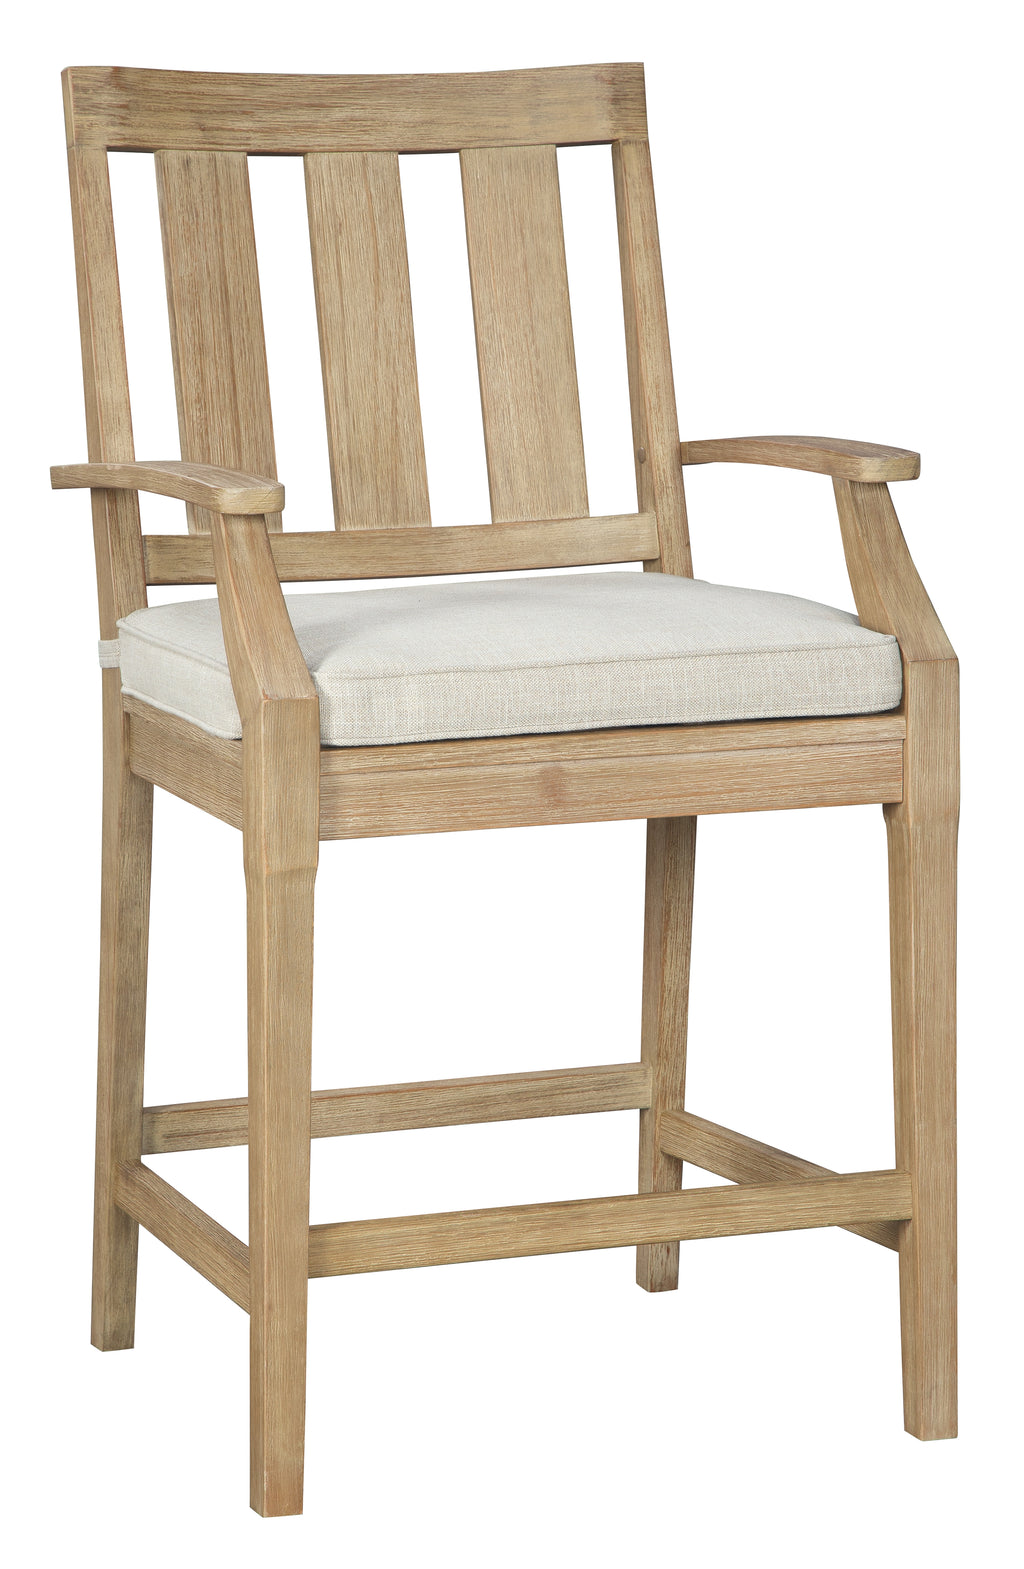 Clare View P801-130 Beige Barstool with Cushion 2CN